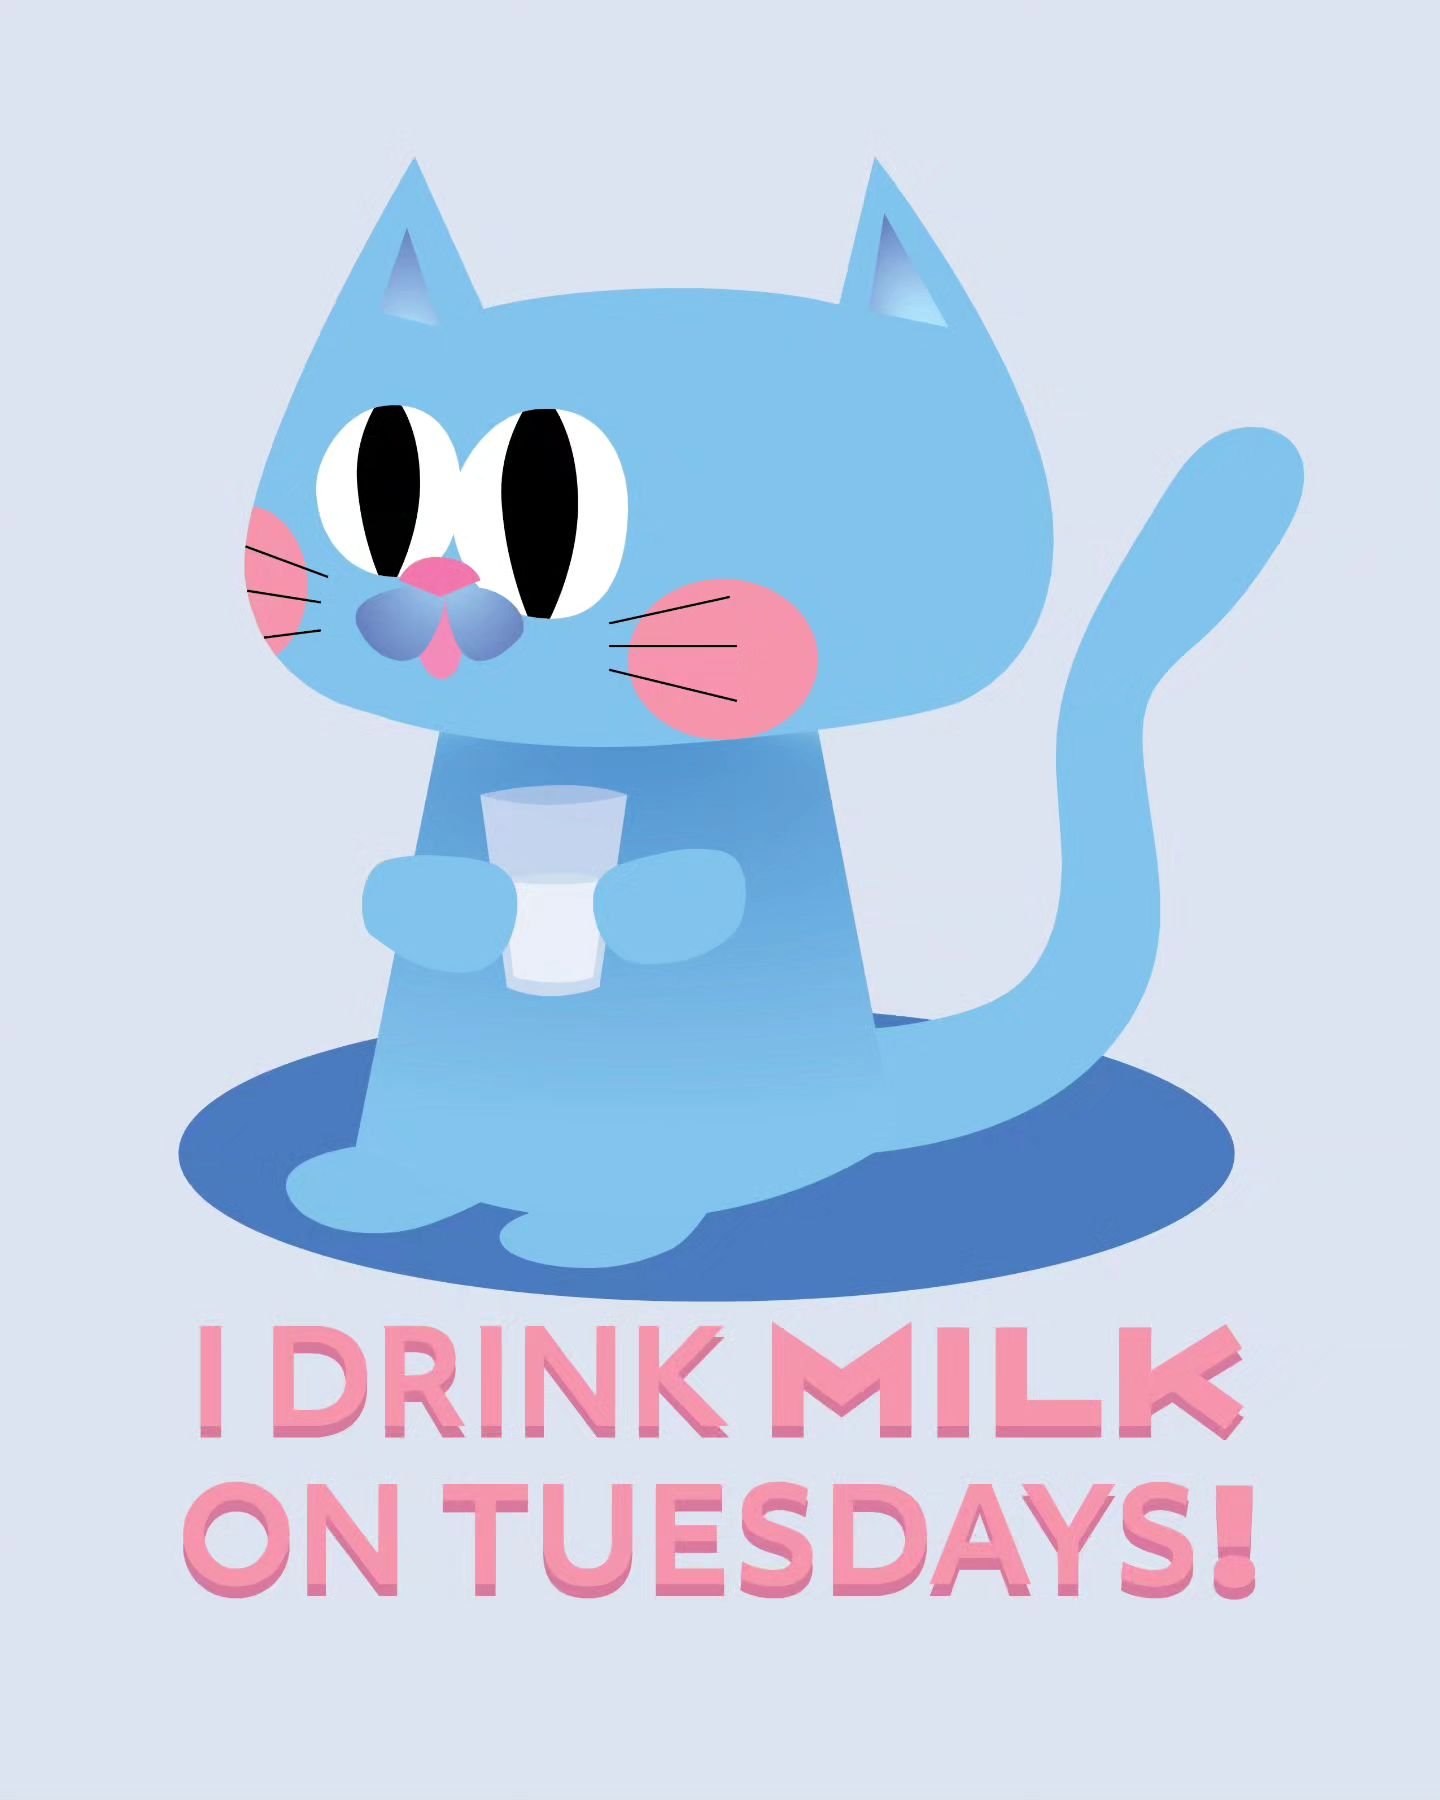 I drink milk on tuesdays! I did some illustrator practice and had a ball!